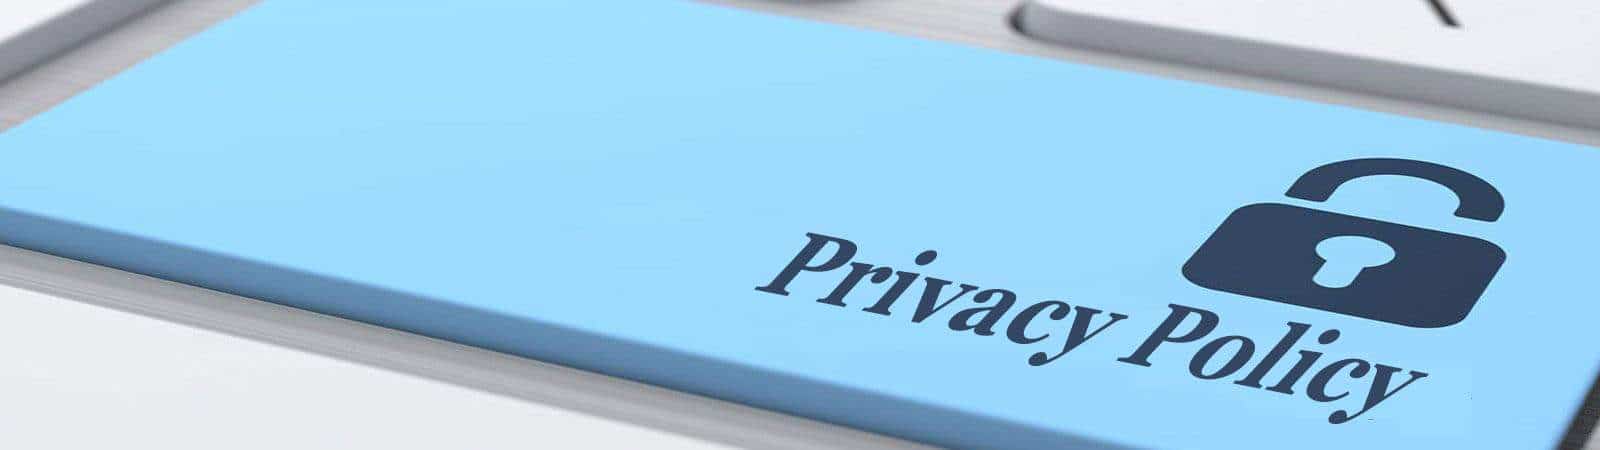 privacy-policy-1600x450